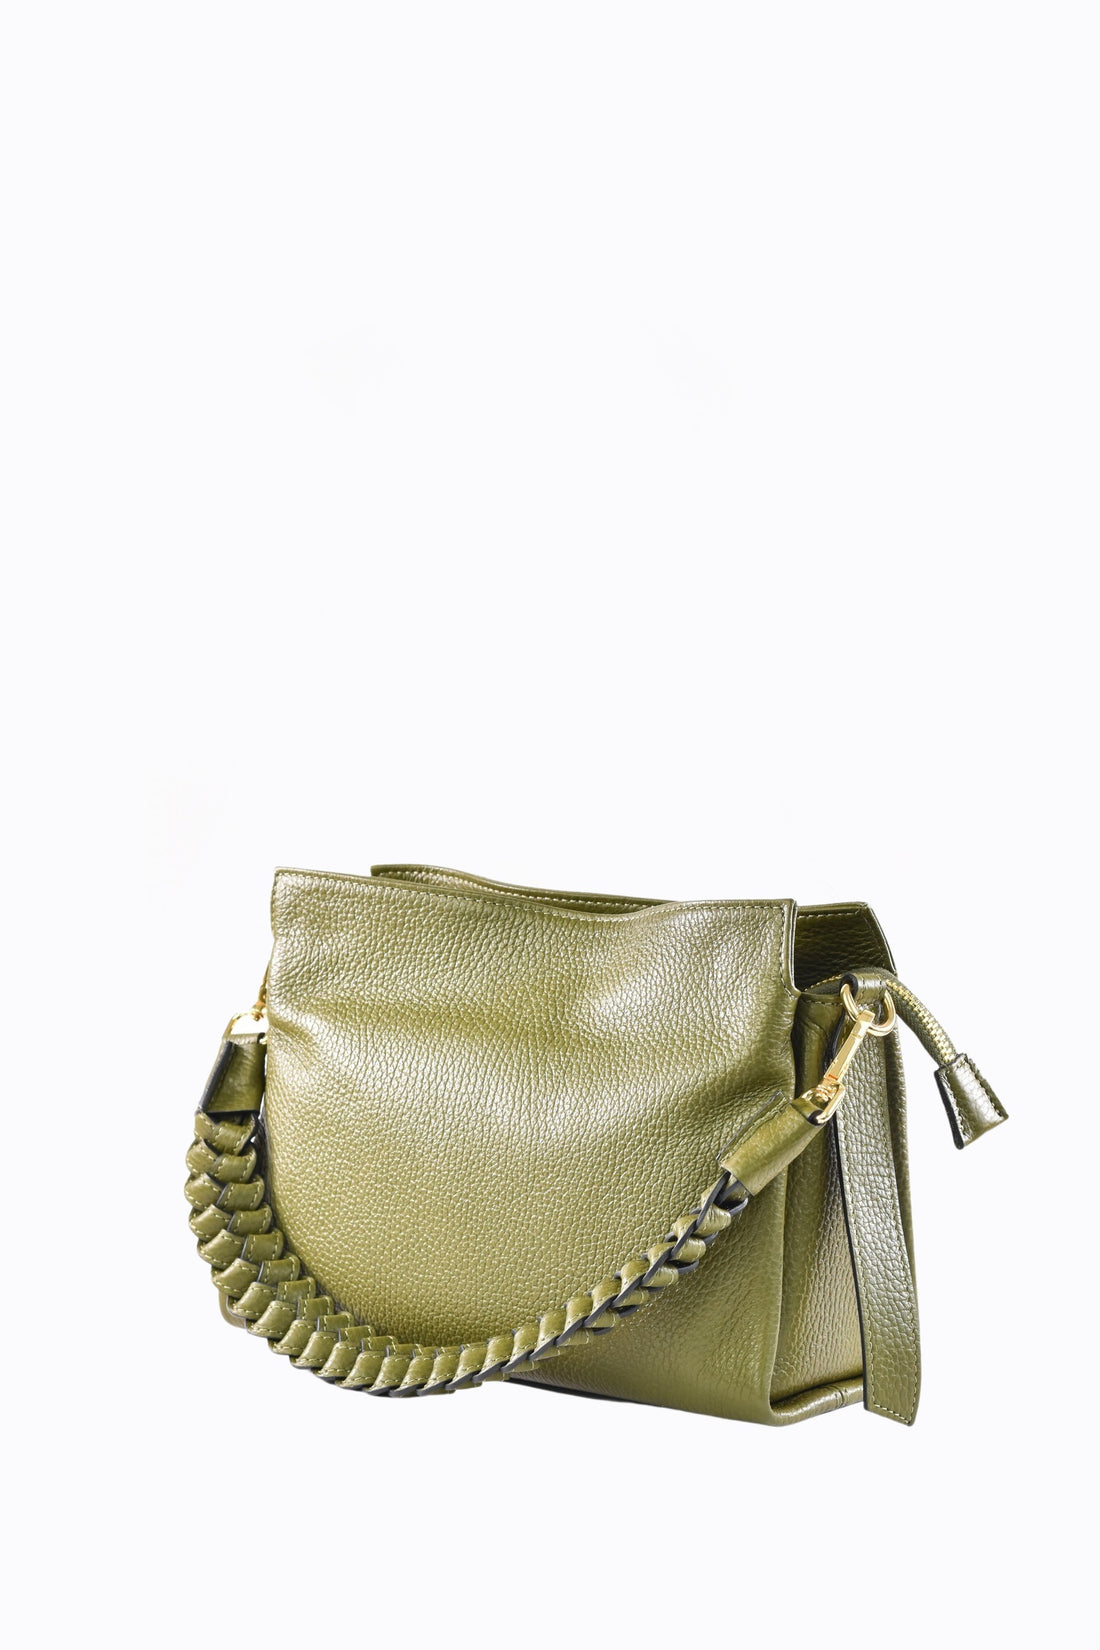 Braid Micro bag in Olive Green Dollar leather